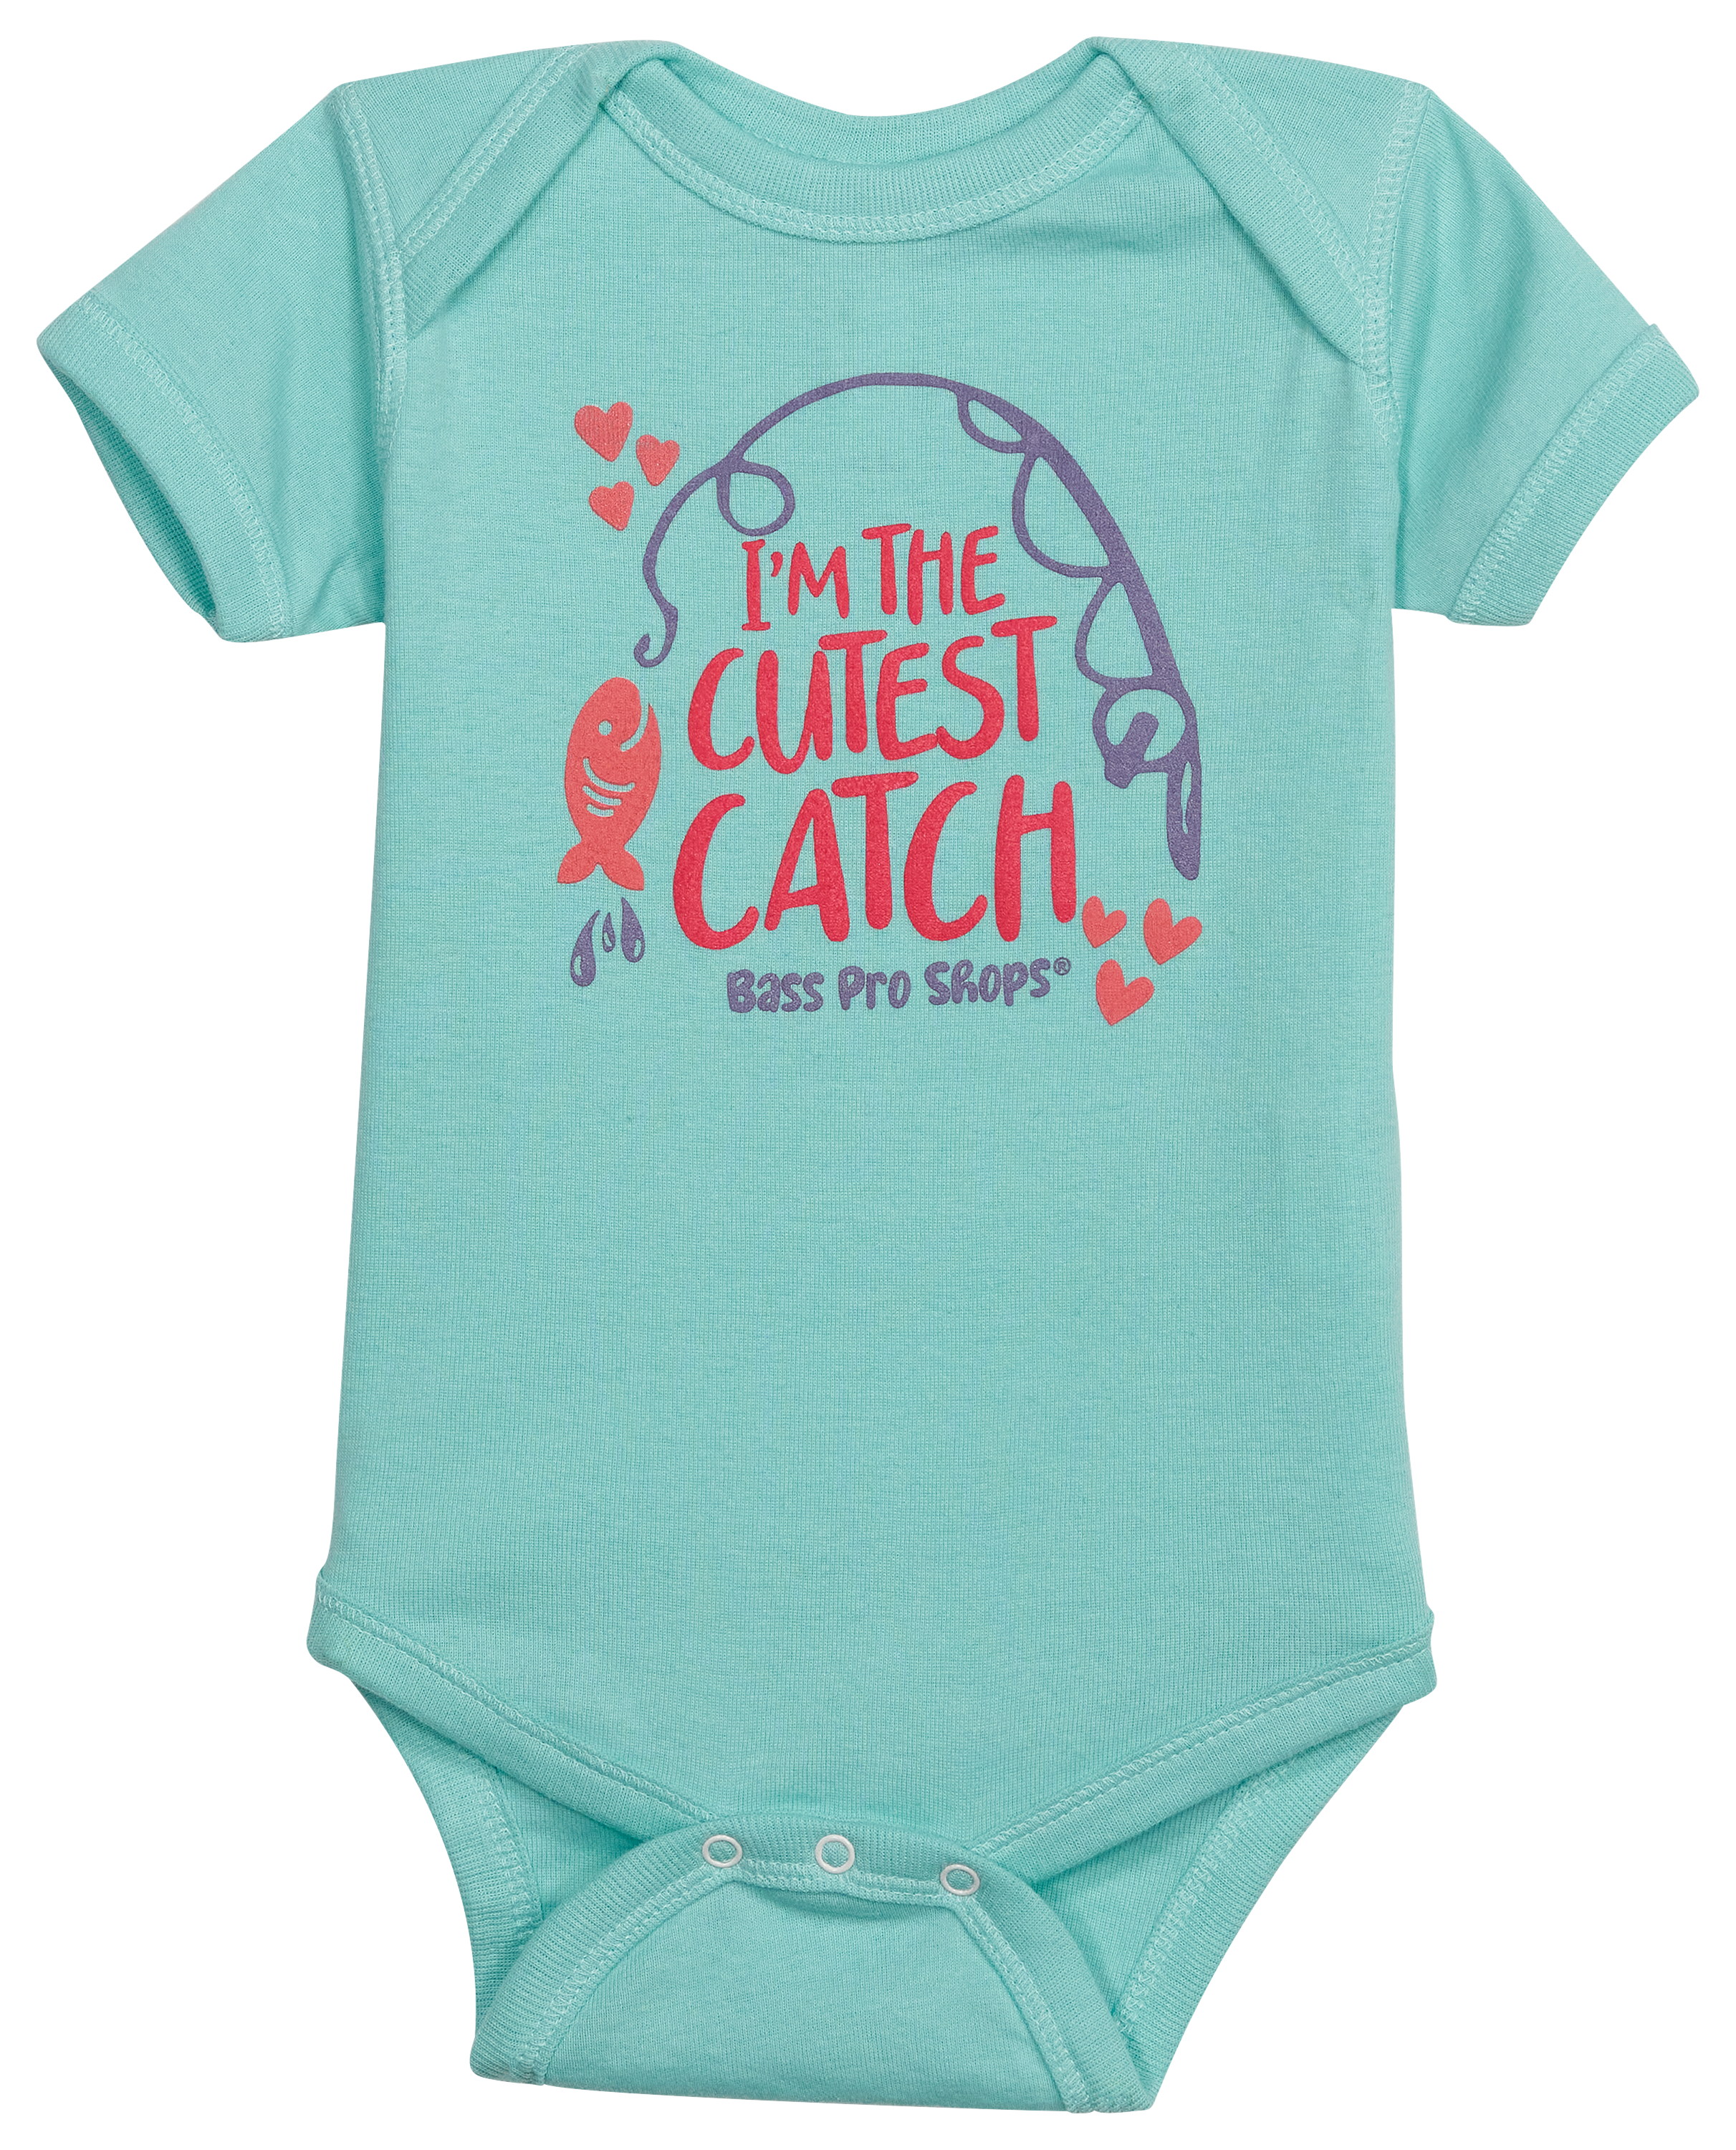 Bass Pro Shops Im The Cutest Catch Onesie for Babies